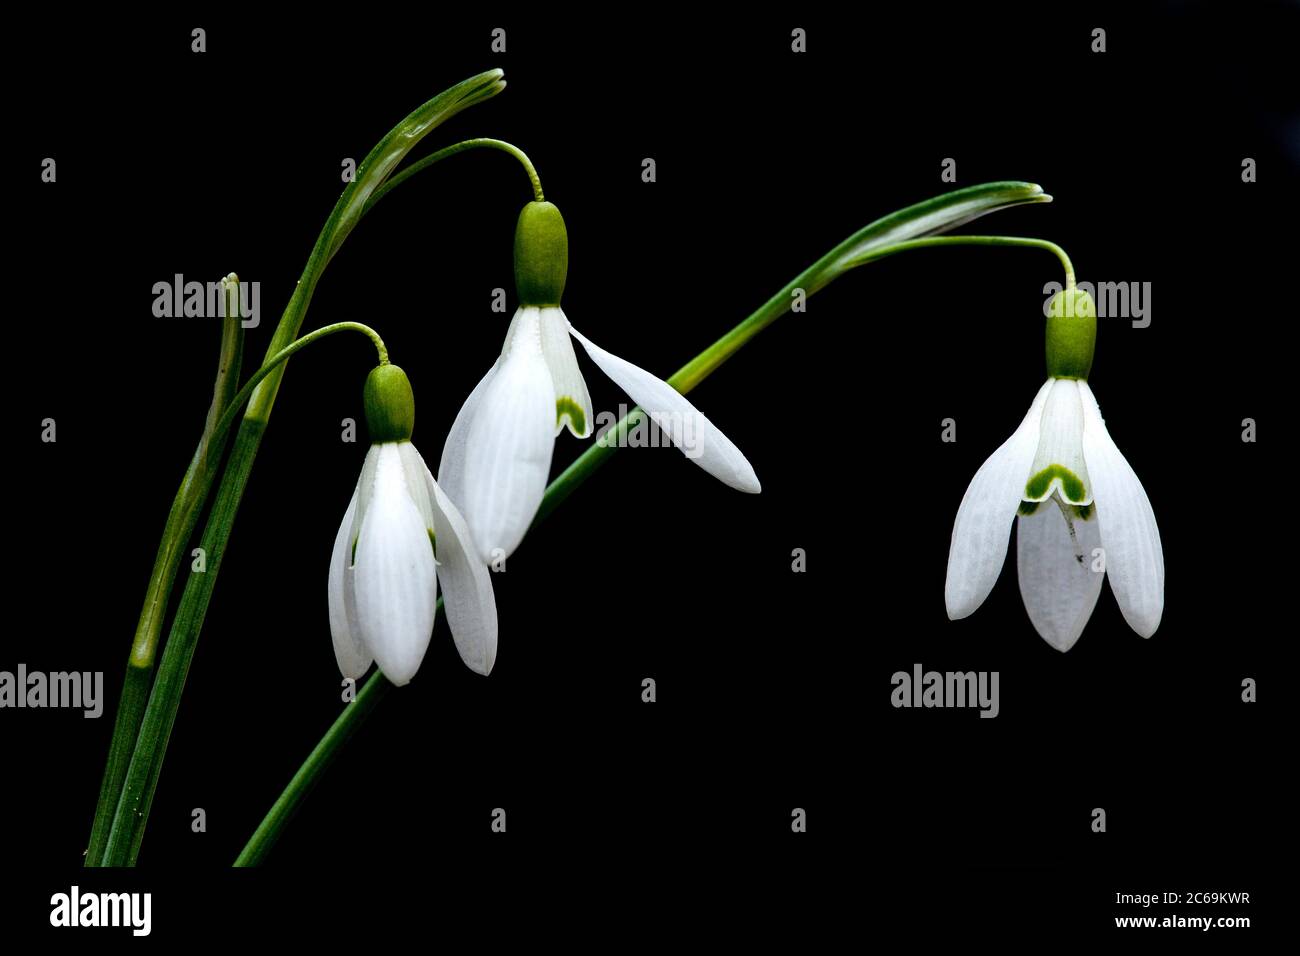 common snowdrop (Galanthus nivalis), flowers against black background, Netherlands Stock Photo